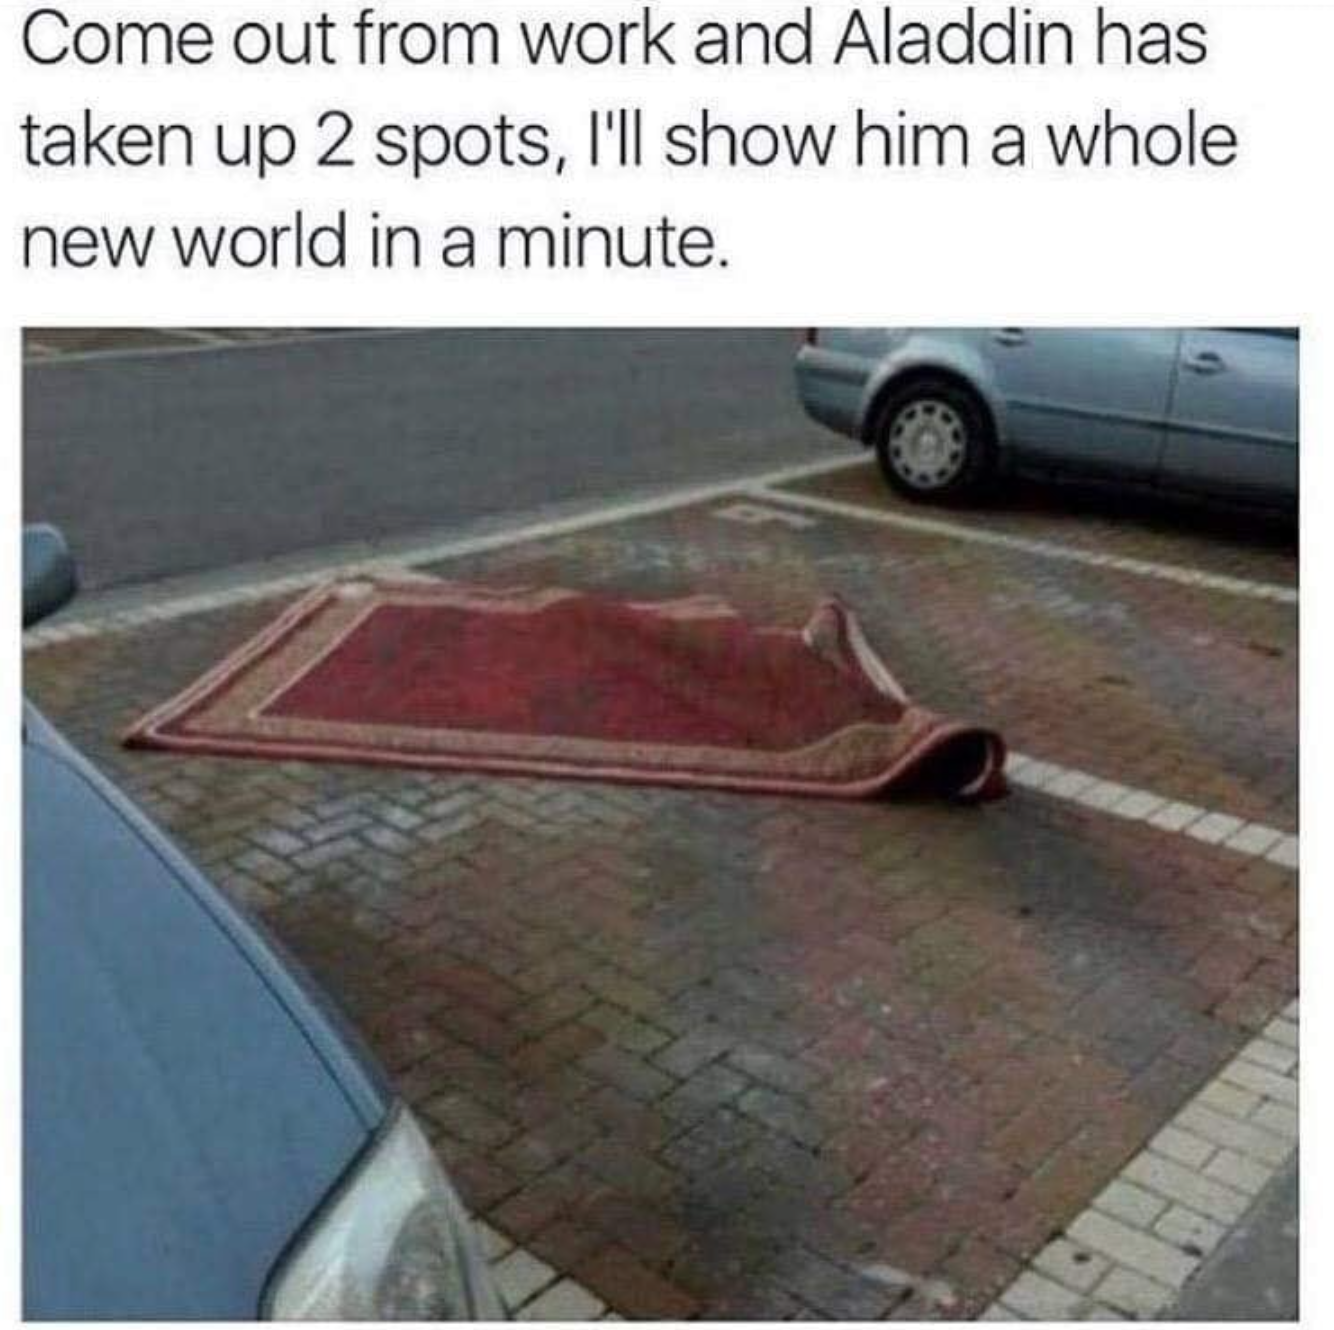 flying carpet meme - Come out from work and Aladdin has taken up 2 spots, I'll show him a whole new world in a minute.